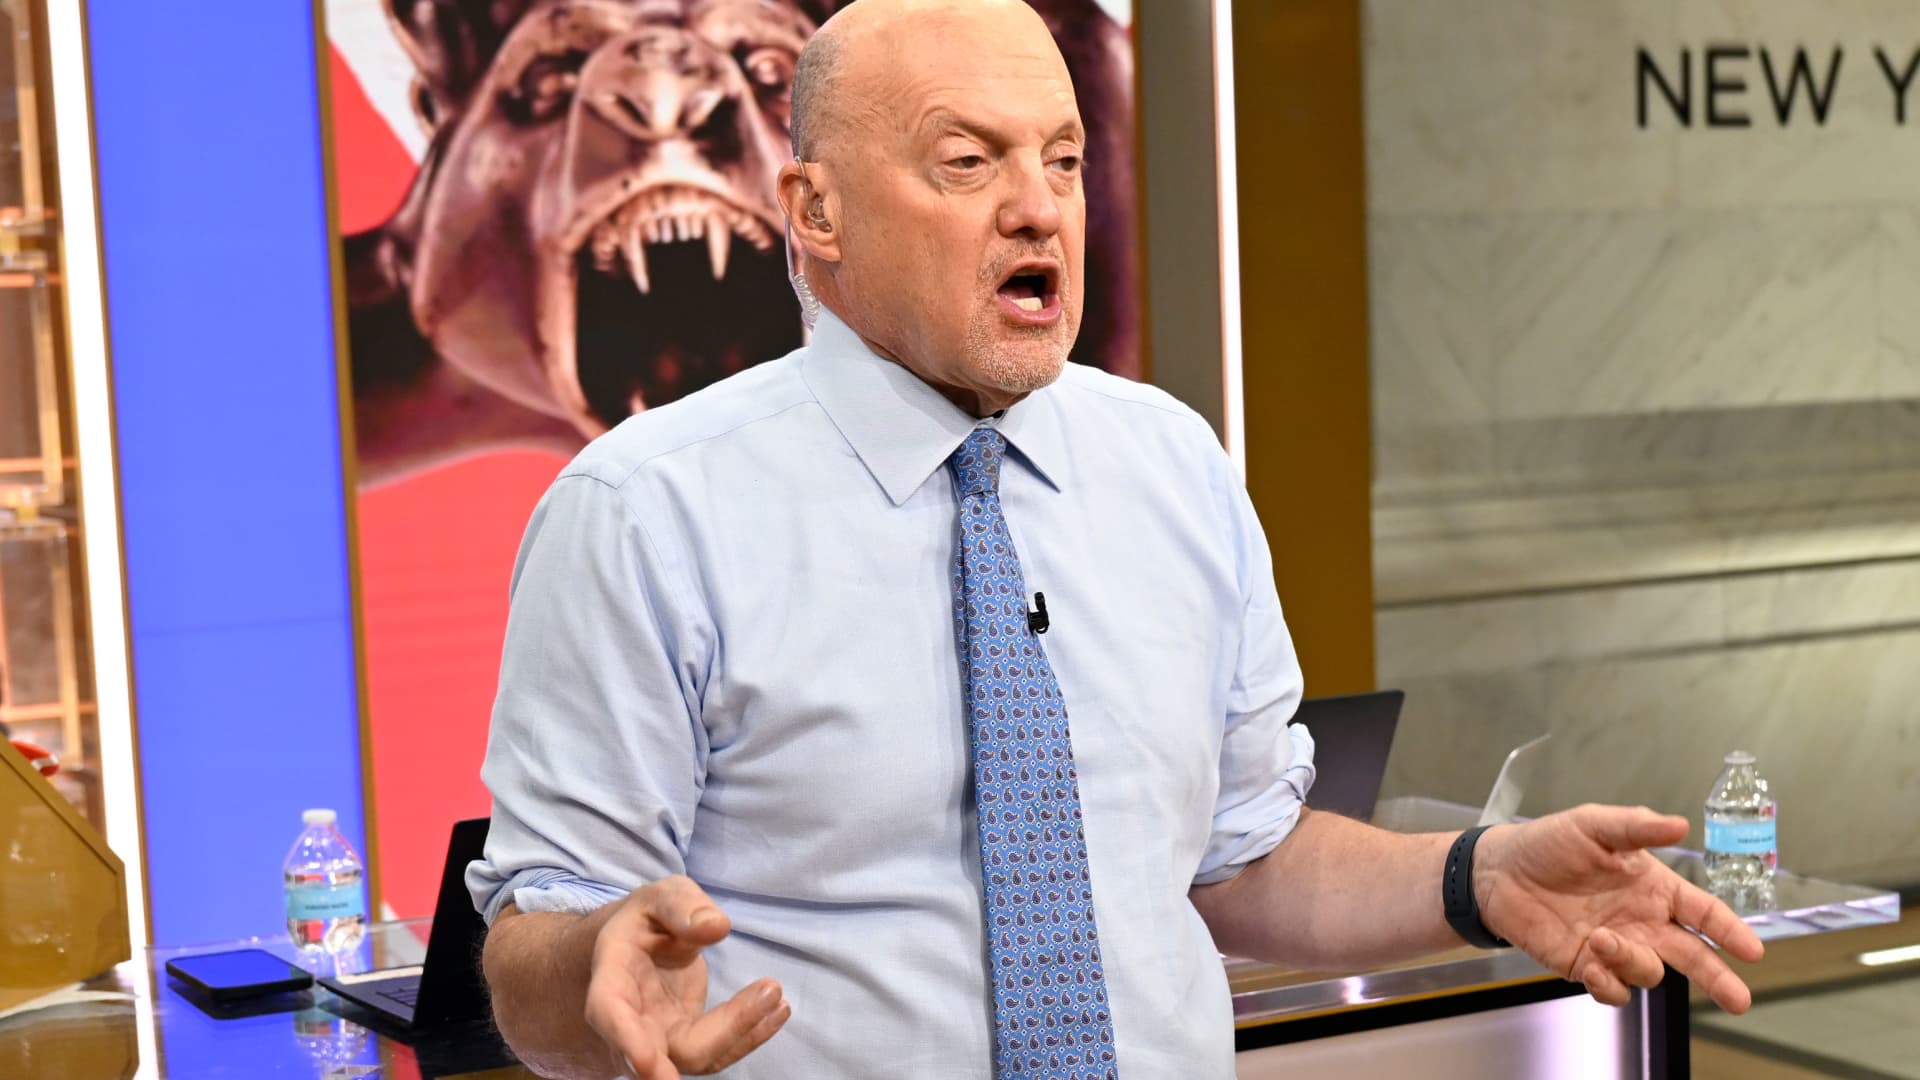 A recession may be coming, but Jim Cramer says he’s not seeing the early signs yet